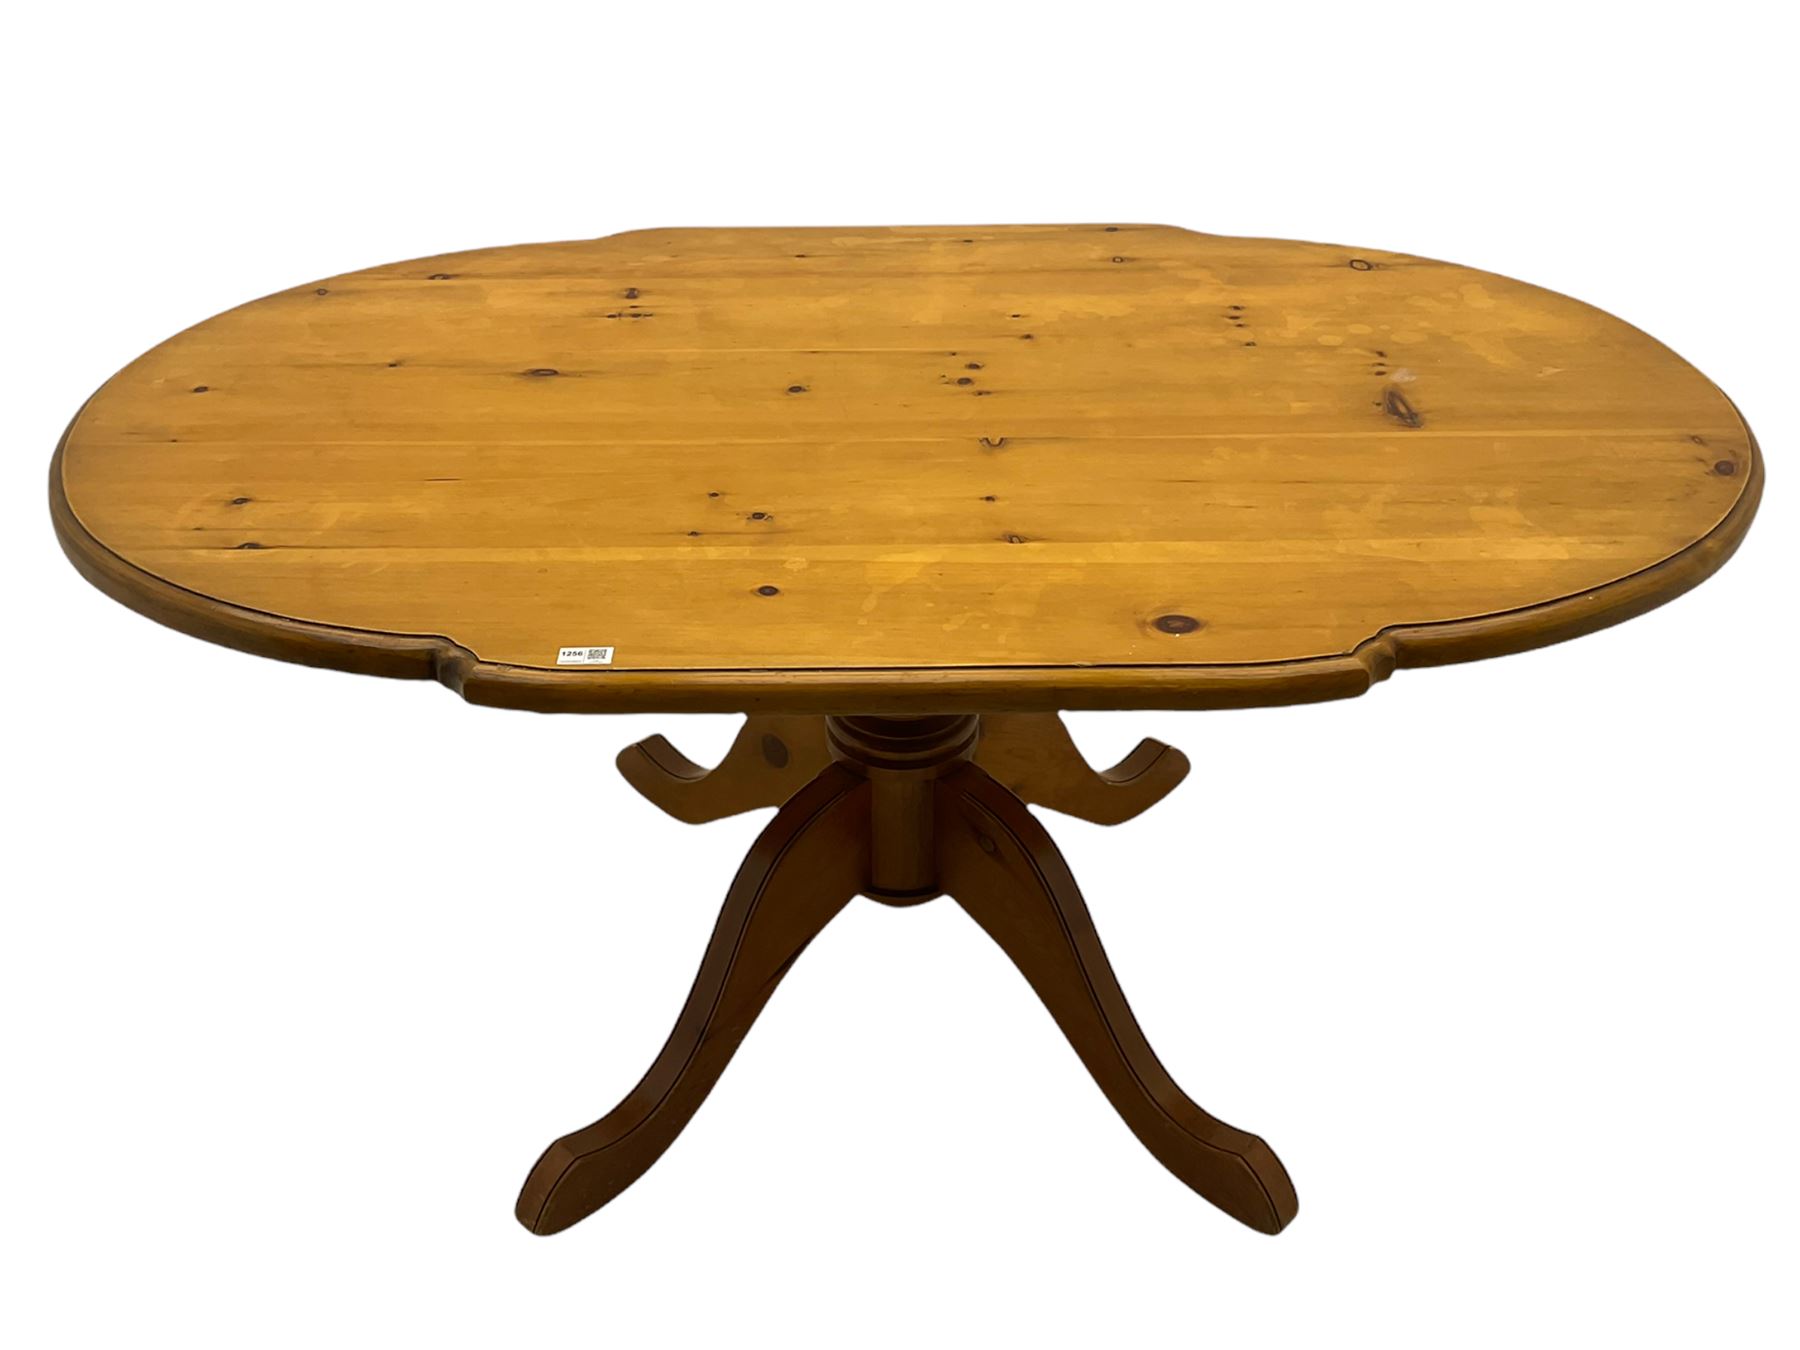 Oval pine dining table